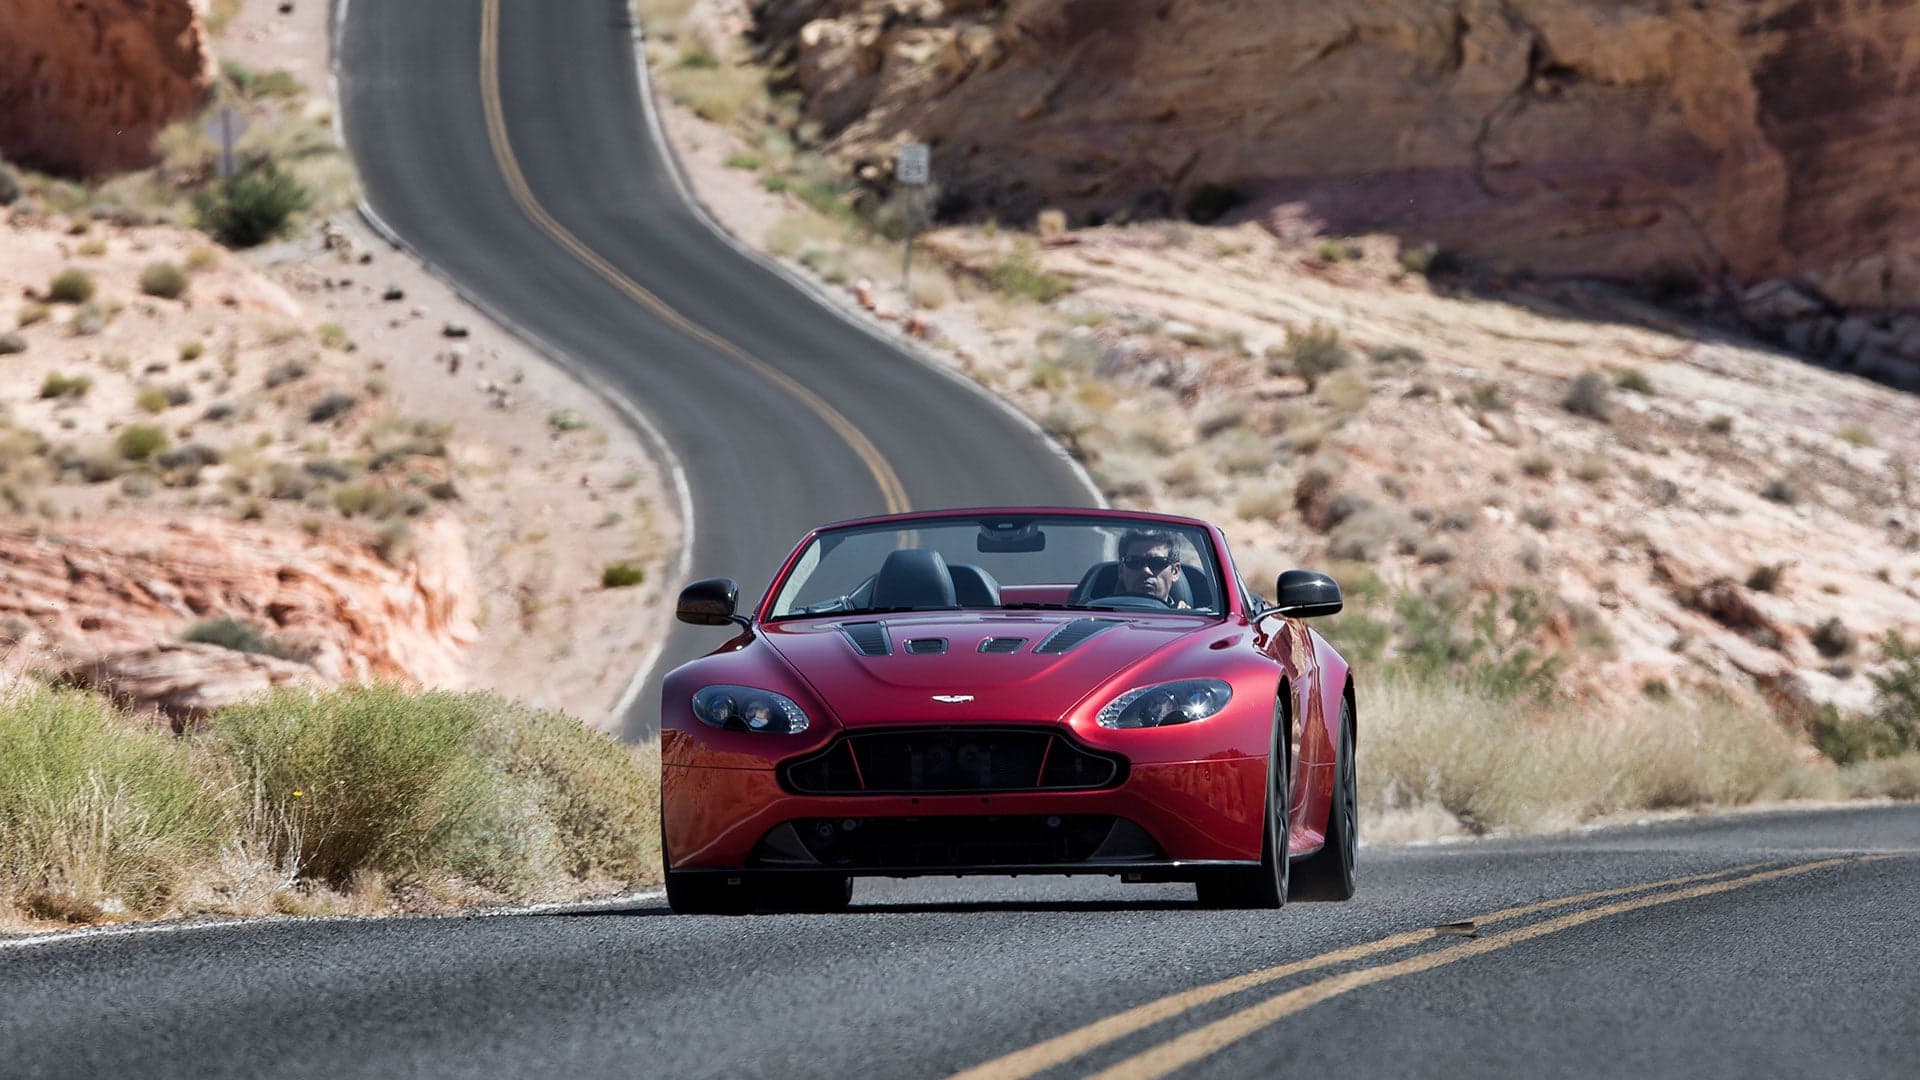 Is Aston Martin Planning a Limited-Edition V12 Vantage S with a 7-Speed Manual?